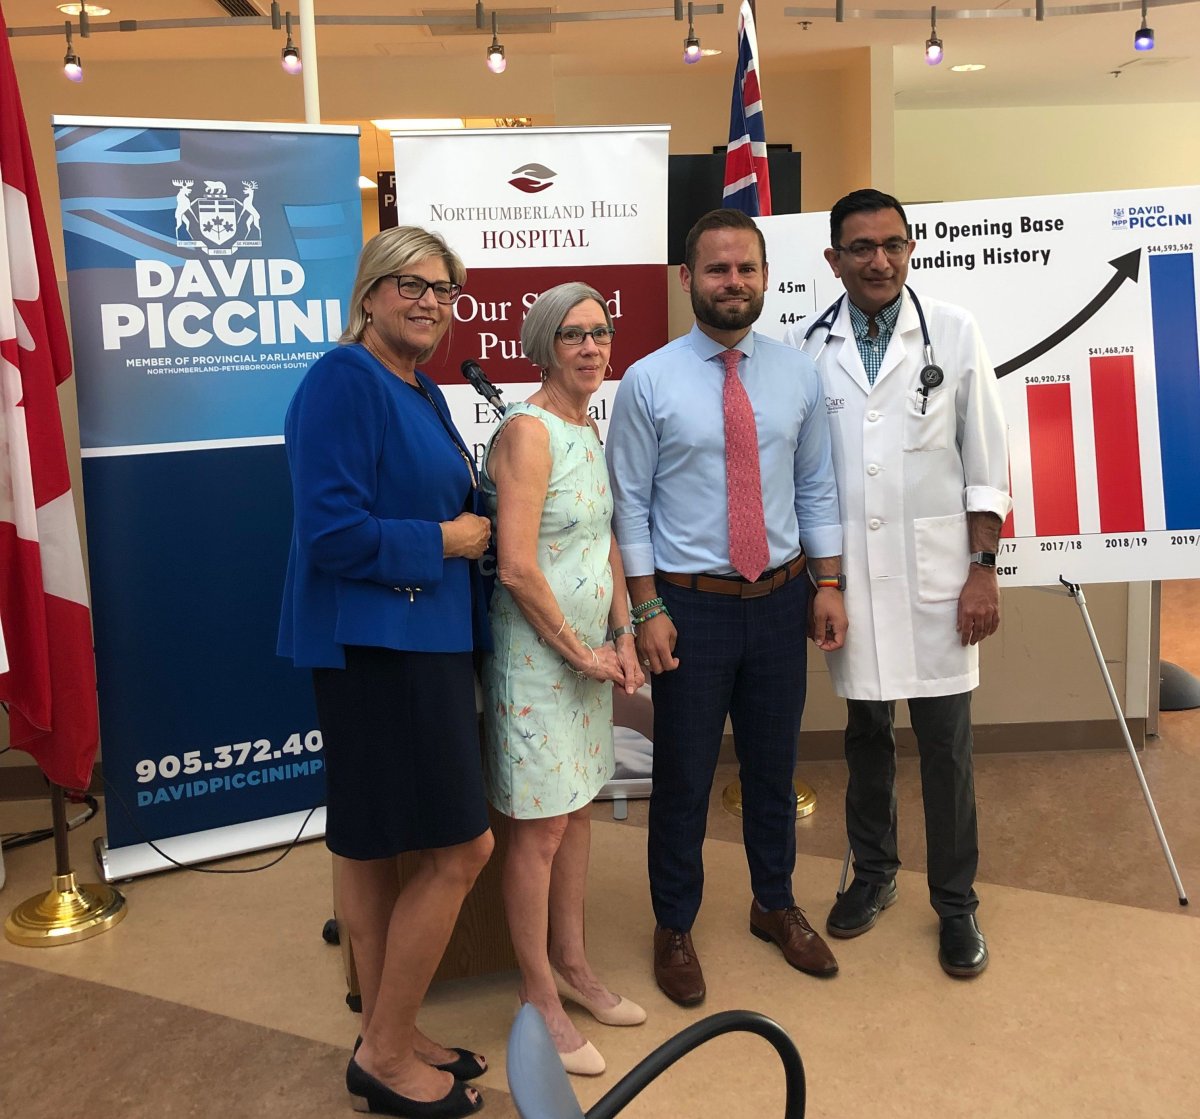 Northumberland-Peterborough South MPP David Piccini, third from right, announces $1 million in base funding for Northumberland Hills Hospital. Joining him were, from left, NHH president and CEO Linda Davis, board vice chair Pamela Went and Dr. Mukesh Bhargava, hospital chief of staff.